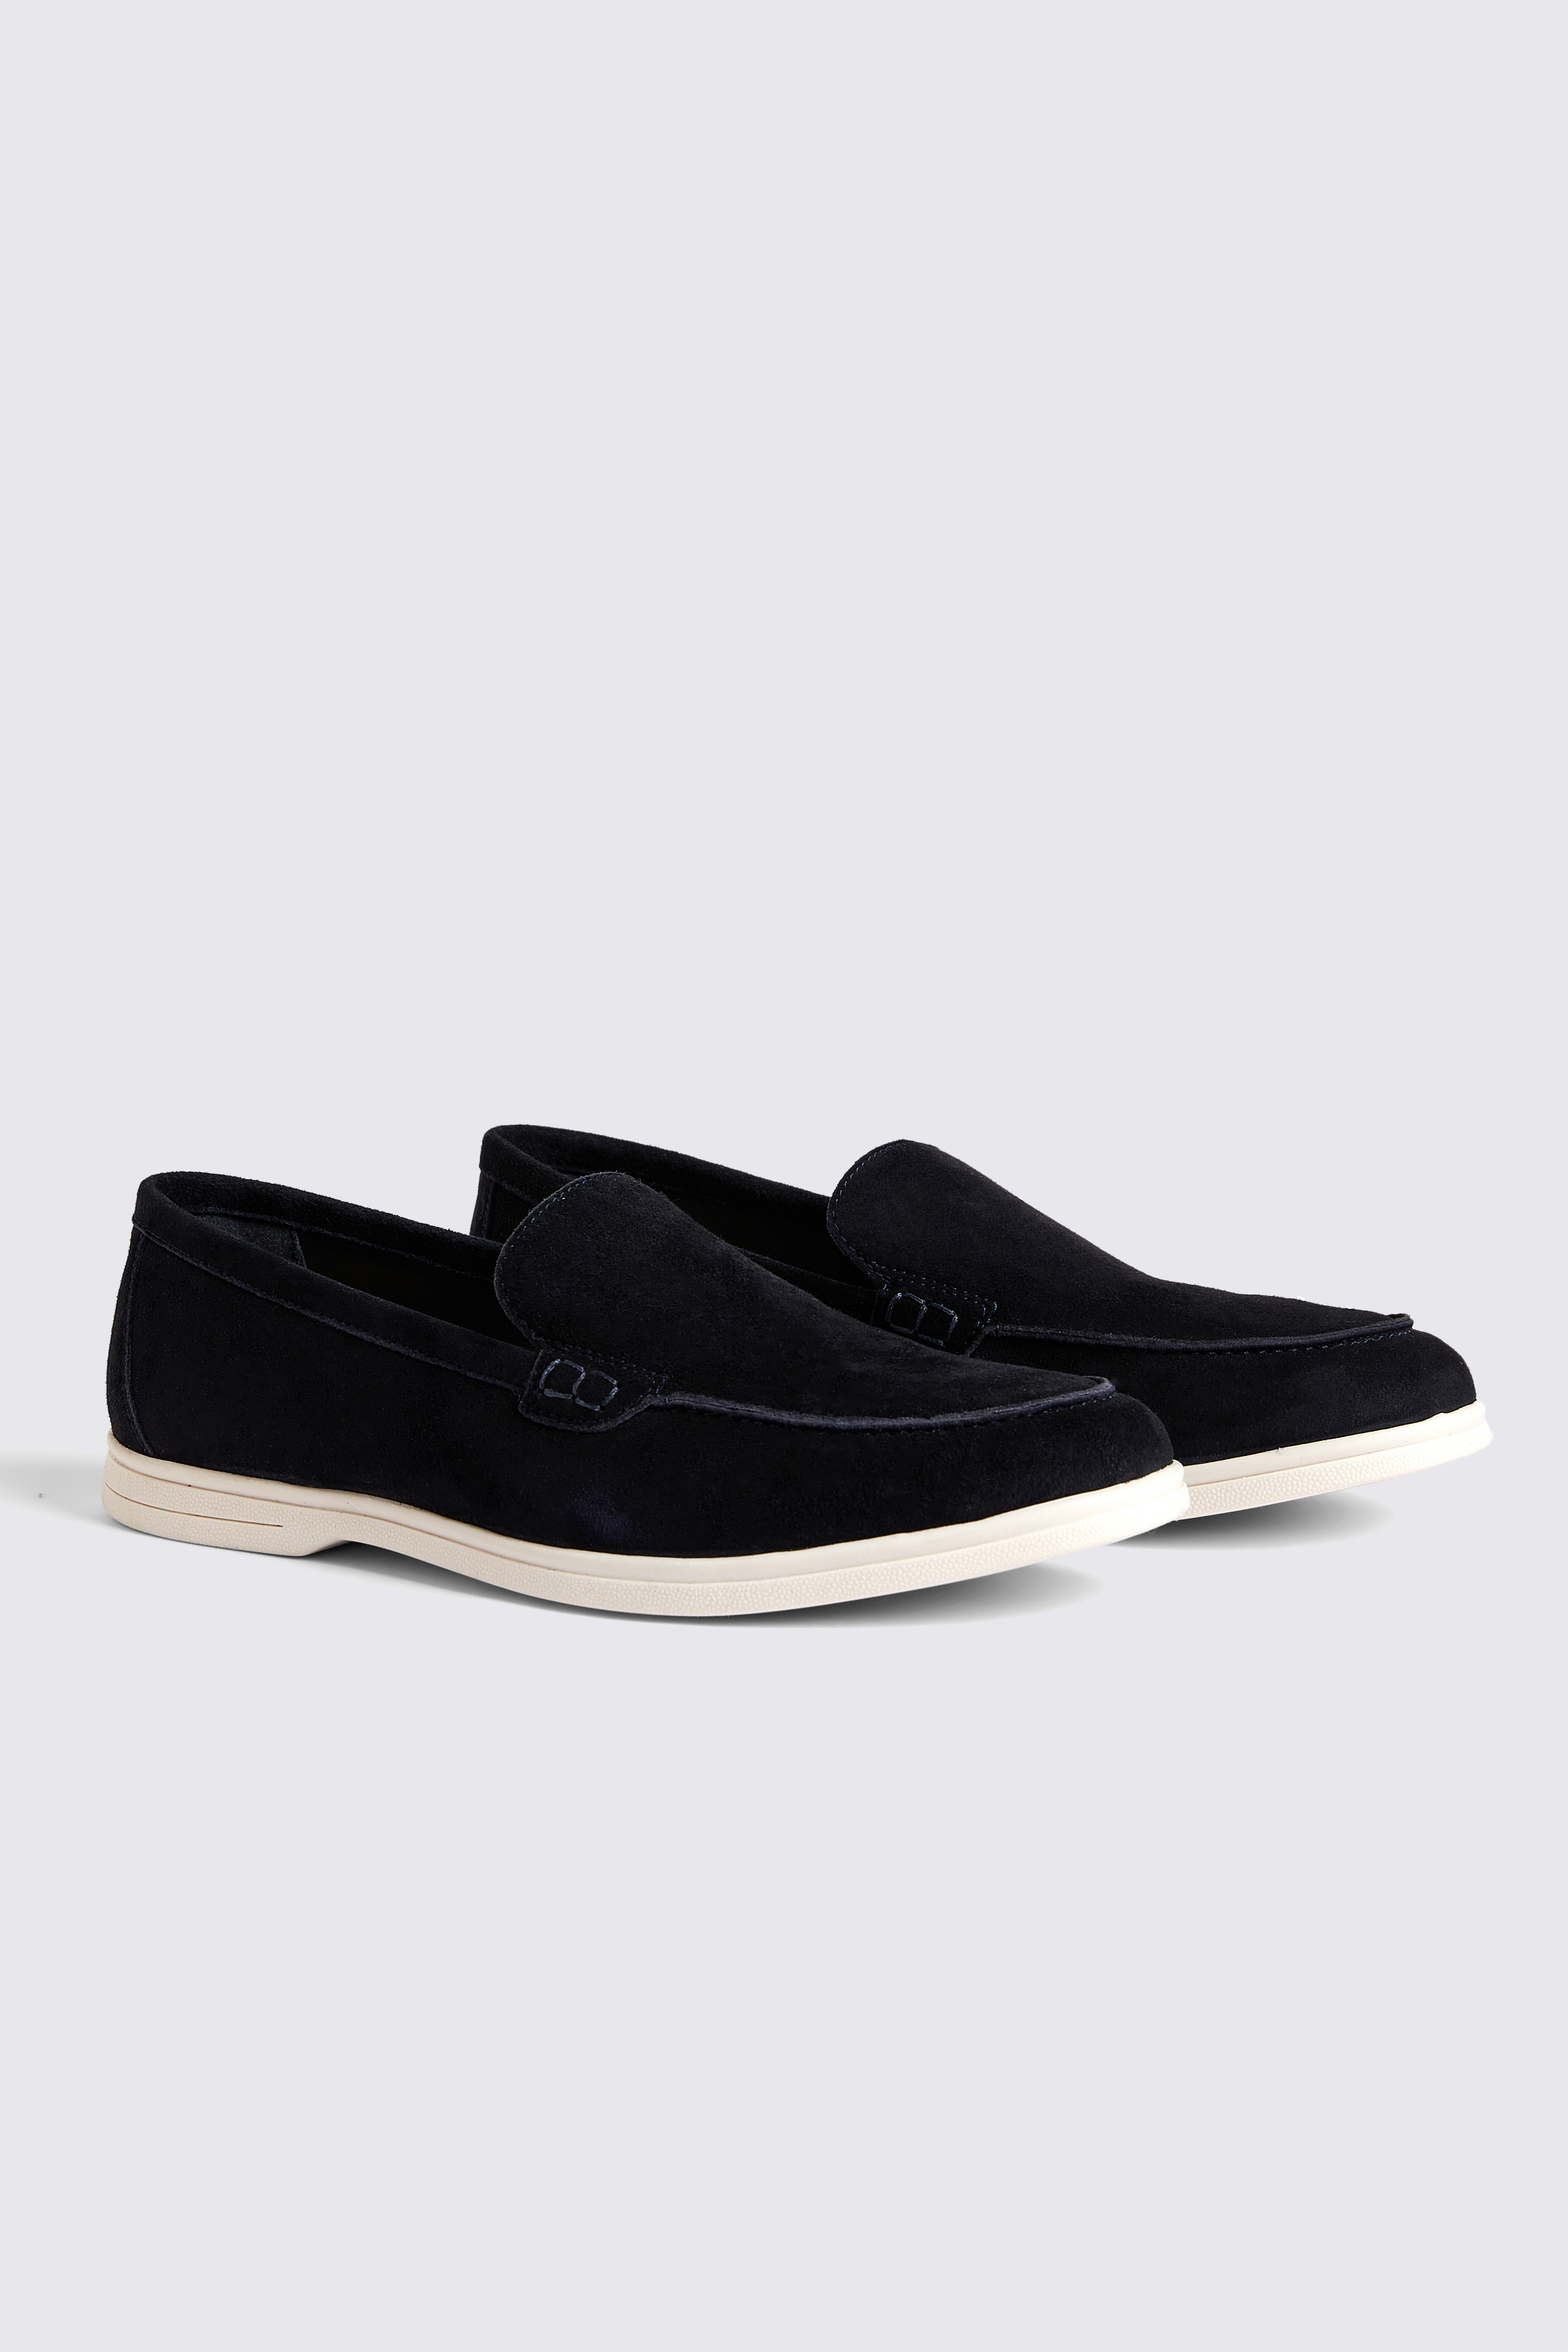 Lewisham Navy Suede Casual Loafers | Buy Online at Moss